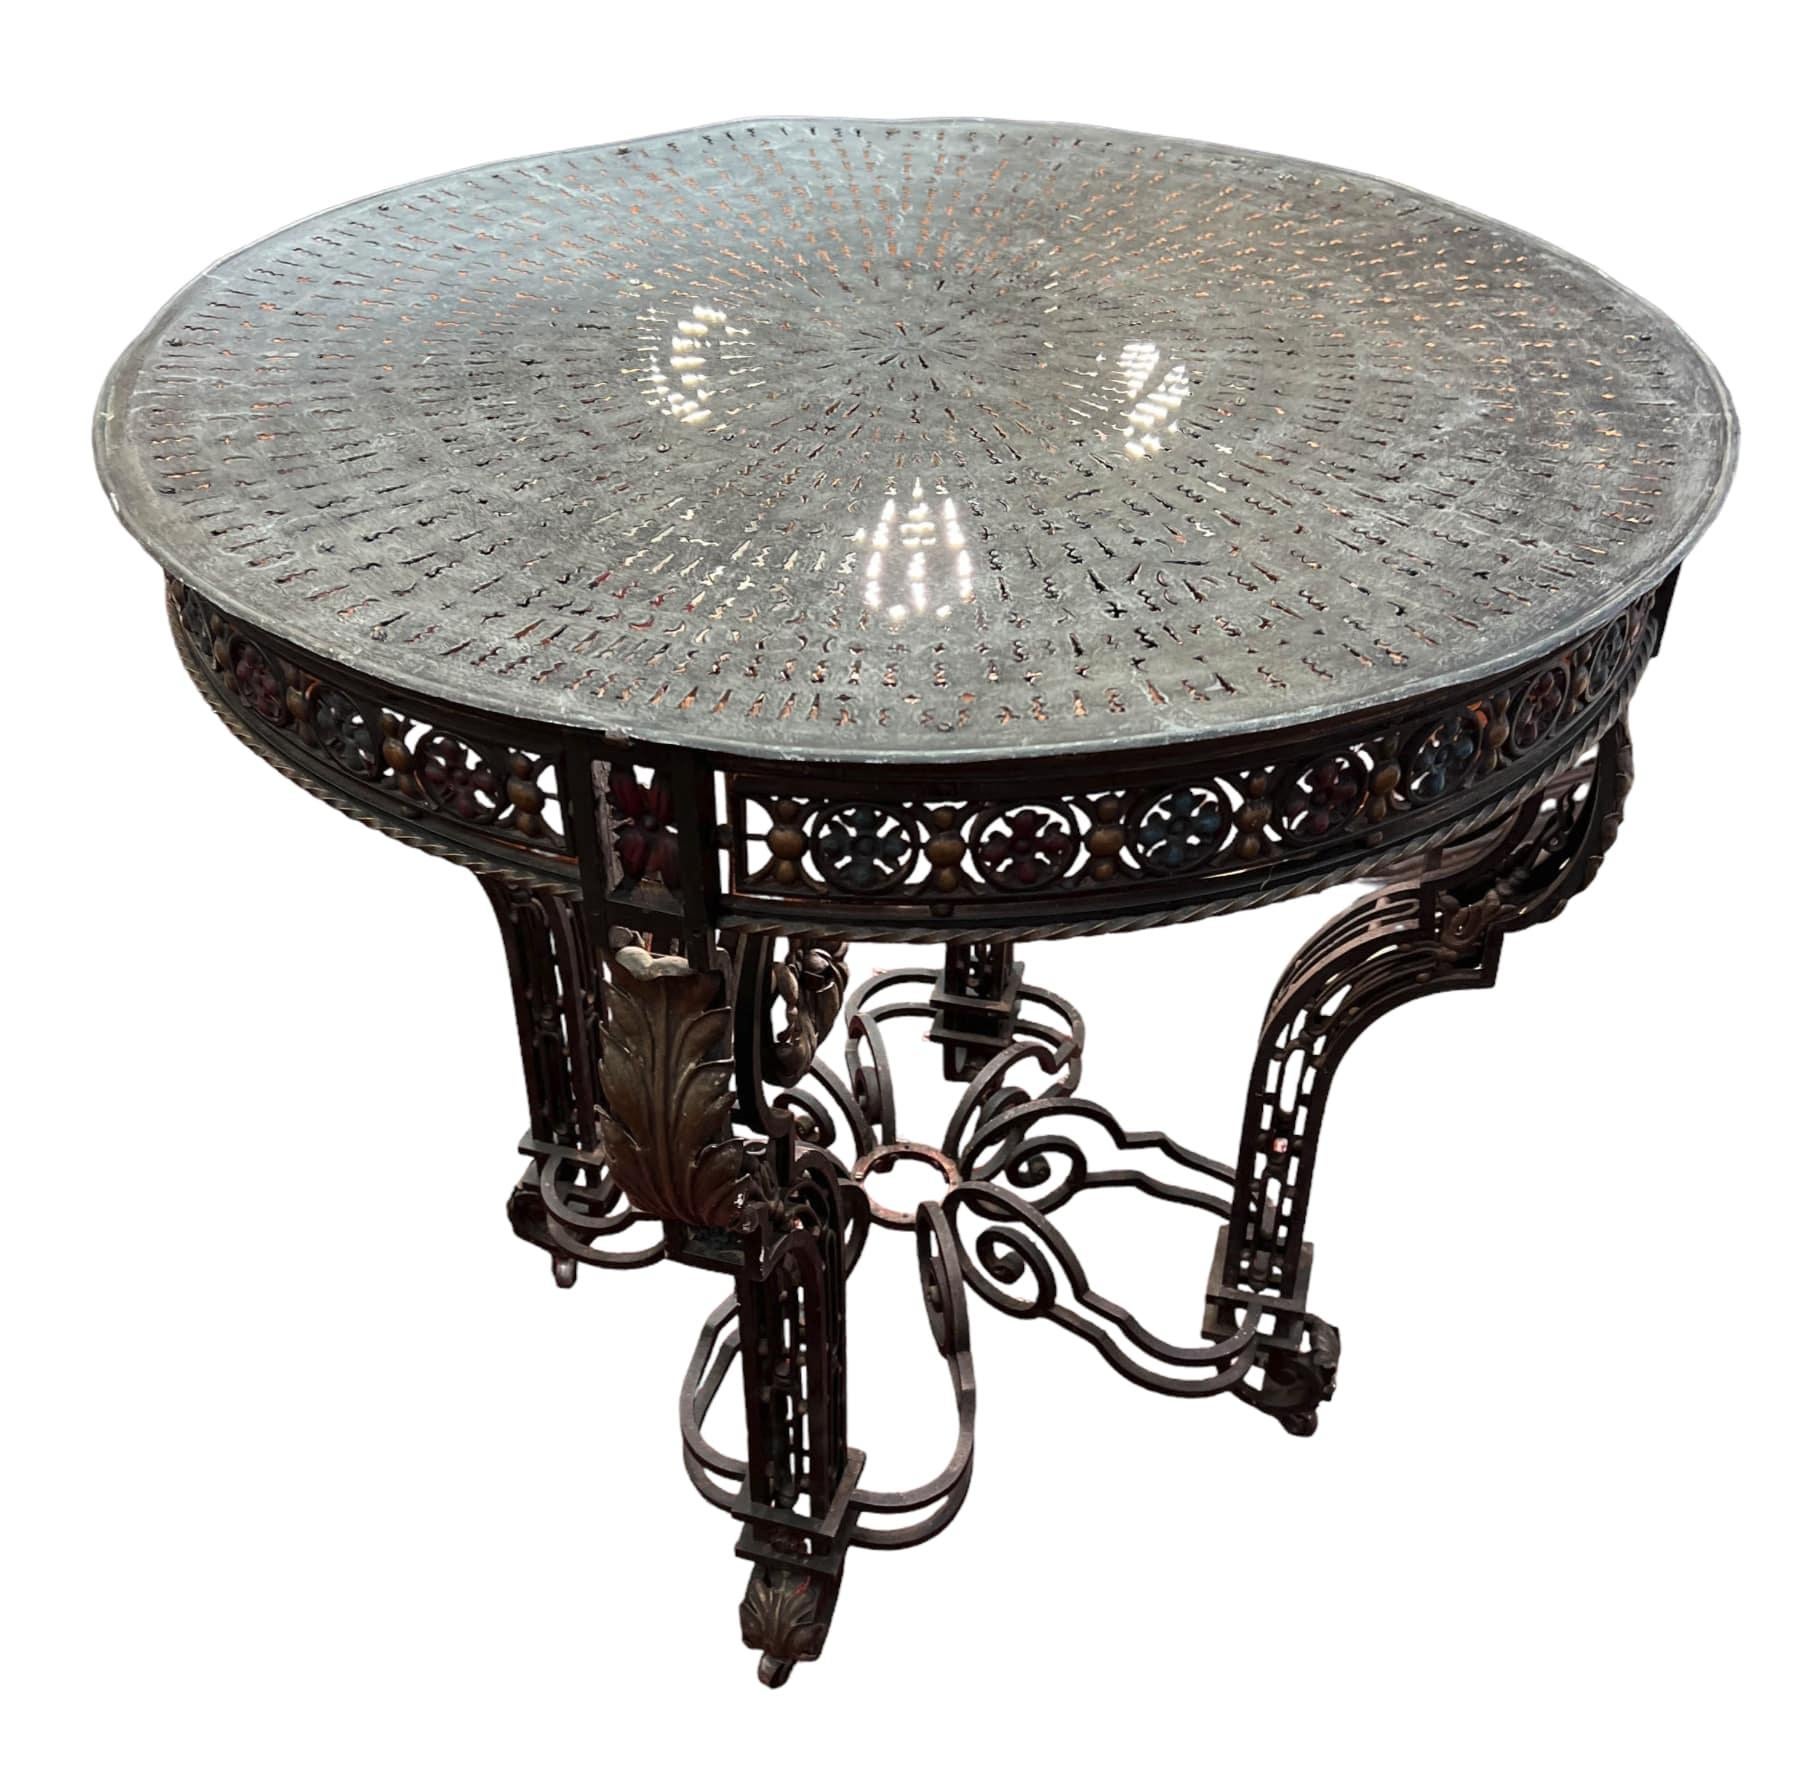 19th Century Wrought Iron 32 Inch Round Table With Built-In Light For Sale 3